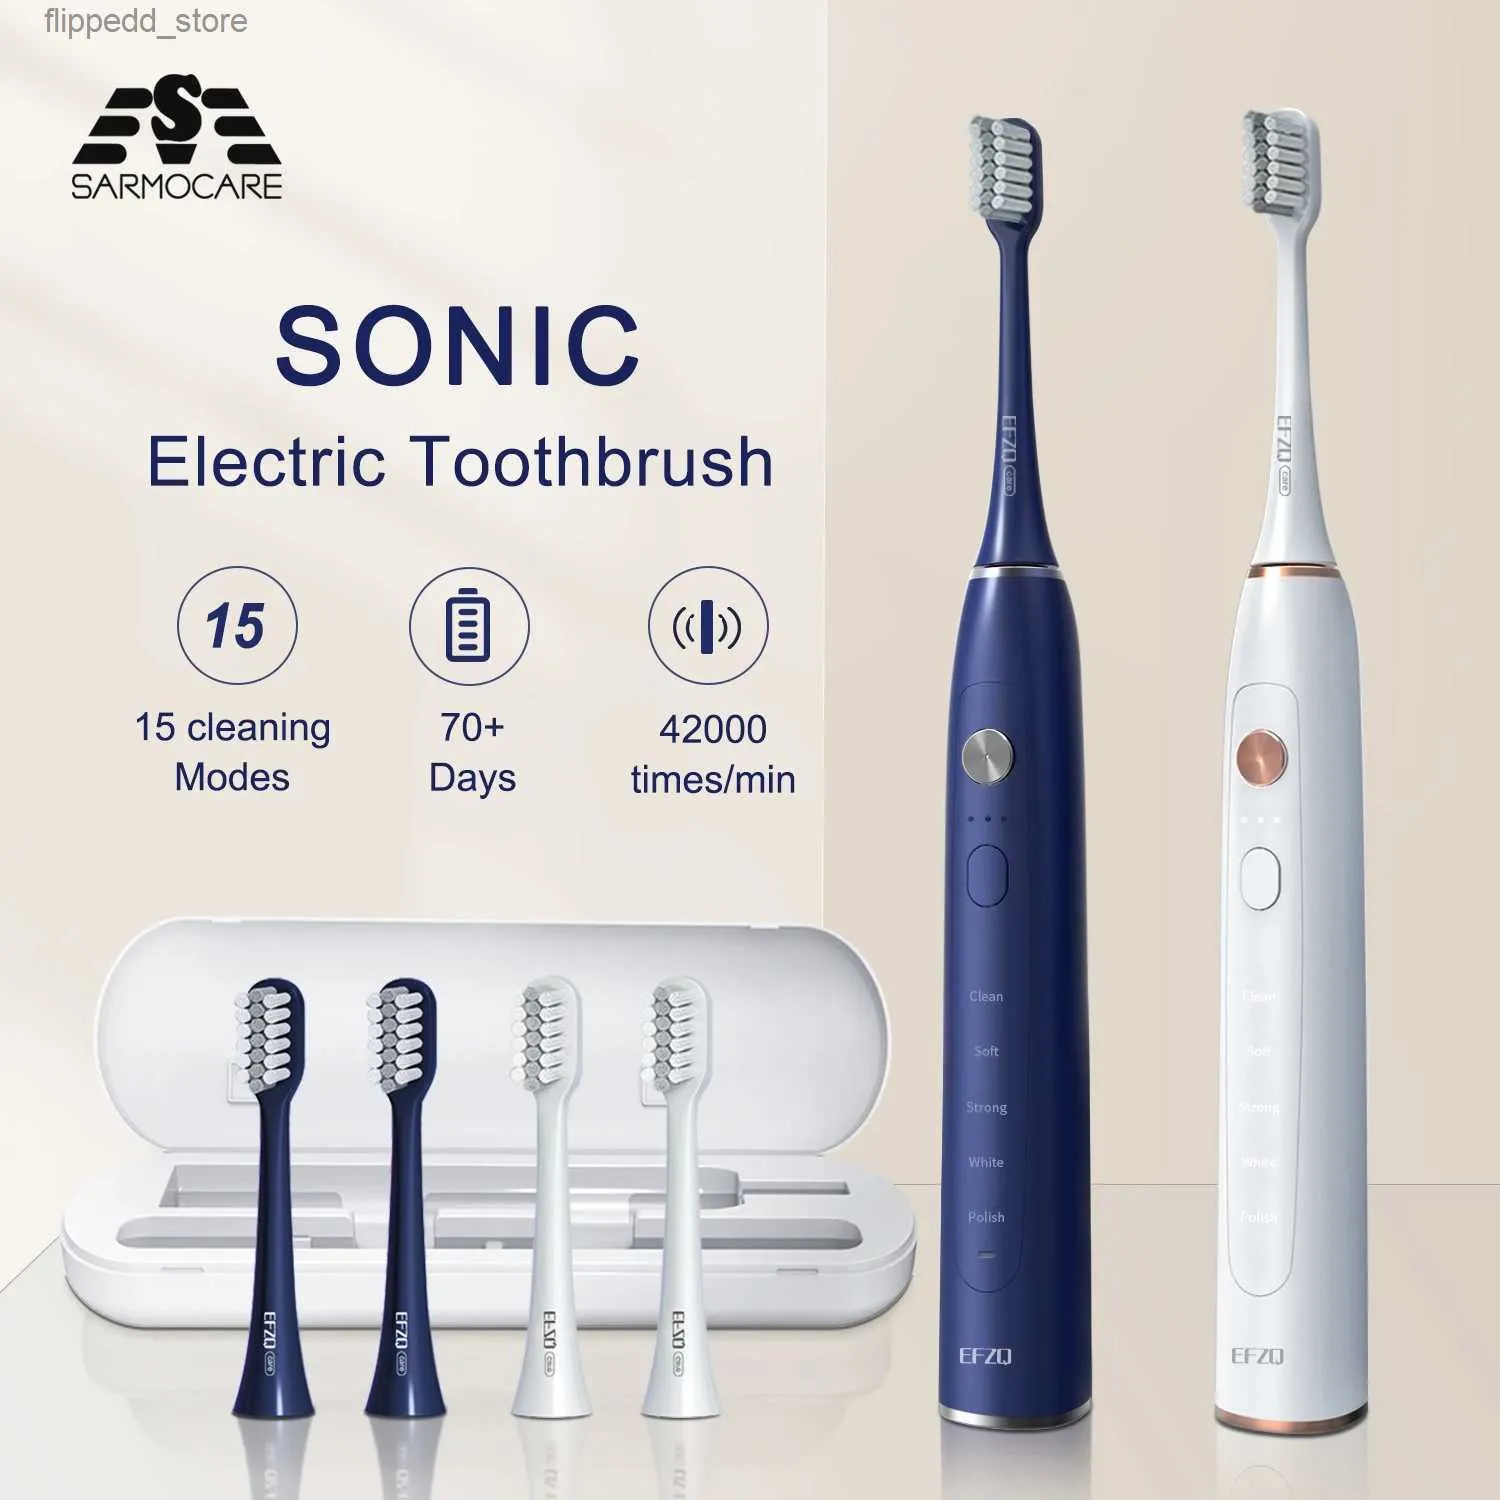 Toothbrush Sonic Electric Toothbrush Tooth Brush USB Electr Toothbrush Adult Ultrasonic Brush For Teeth Cleaning Fast Shipping With Case Q231117